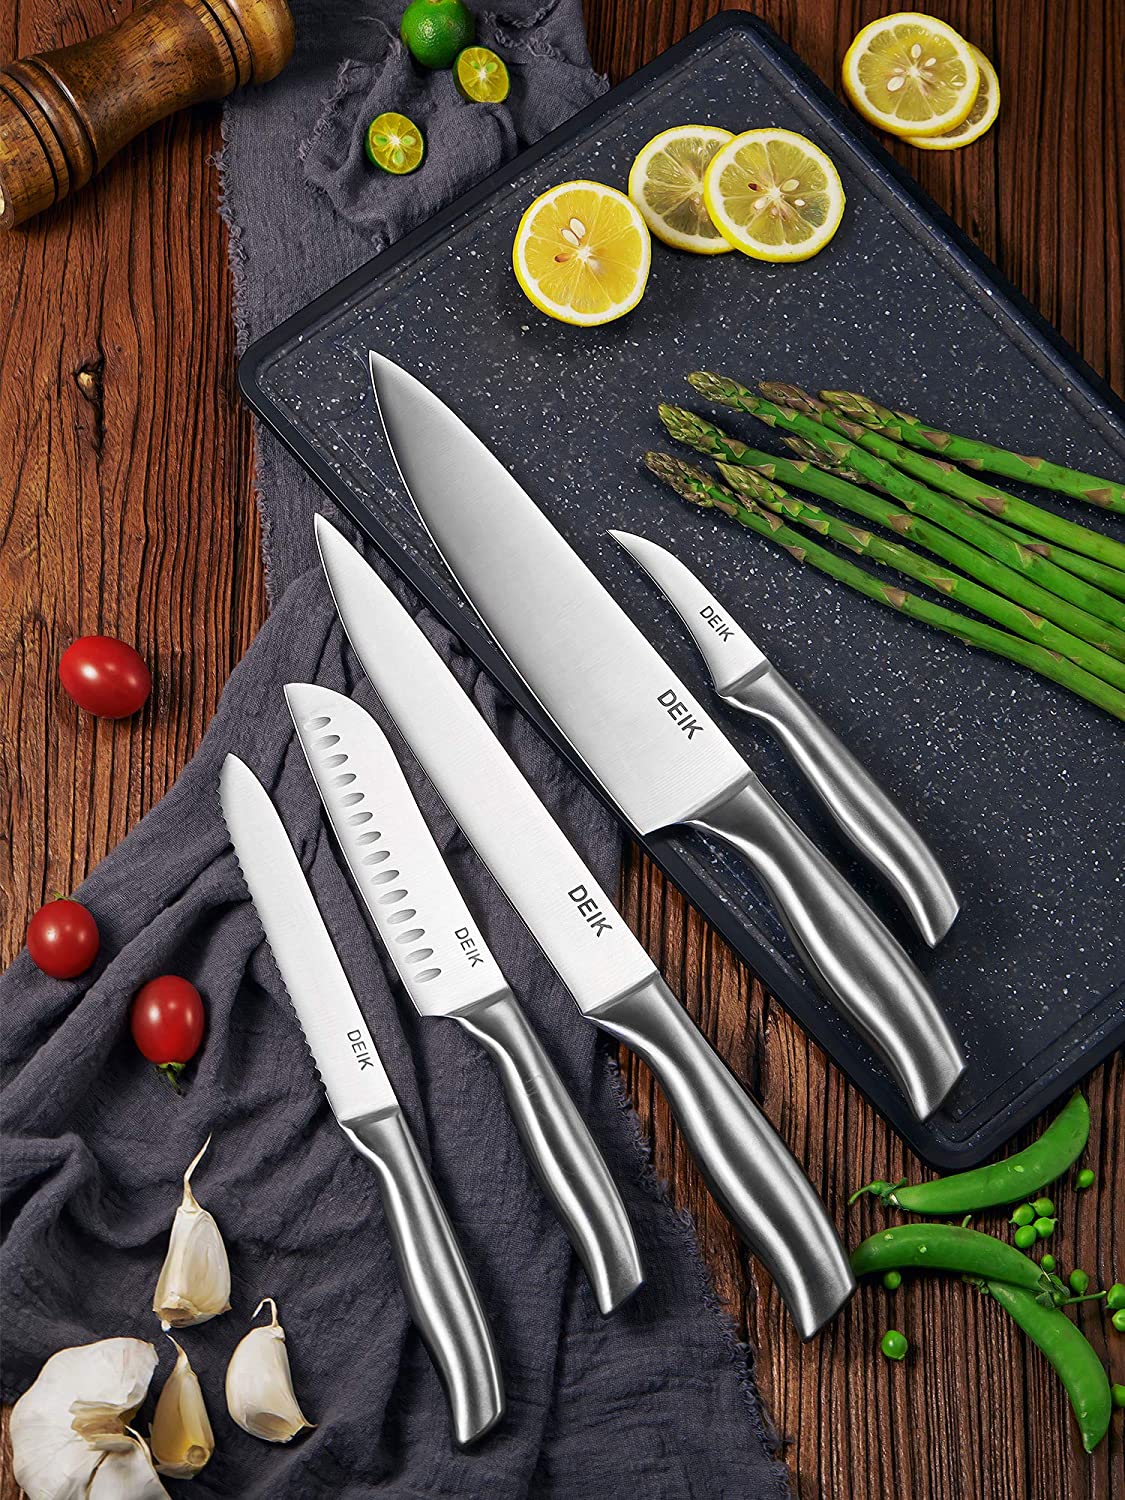 Deik Knife Set, 16-Piece Kitchen Knife Set with Wood Block, Manual Sharpening for Chef Knife Set, Stainless Steel Hollow Handle Block Set, Terrific Gift For a Family